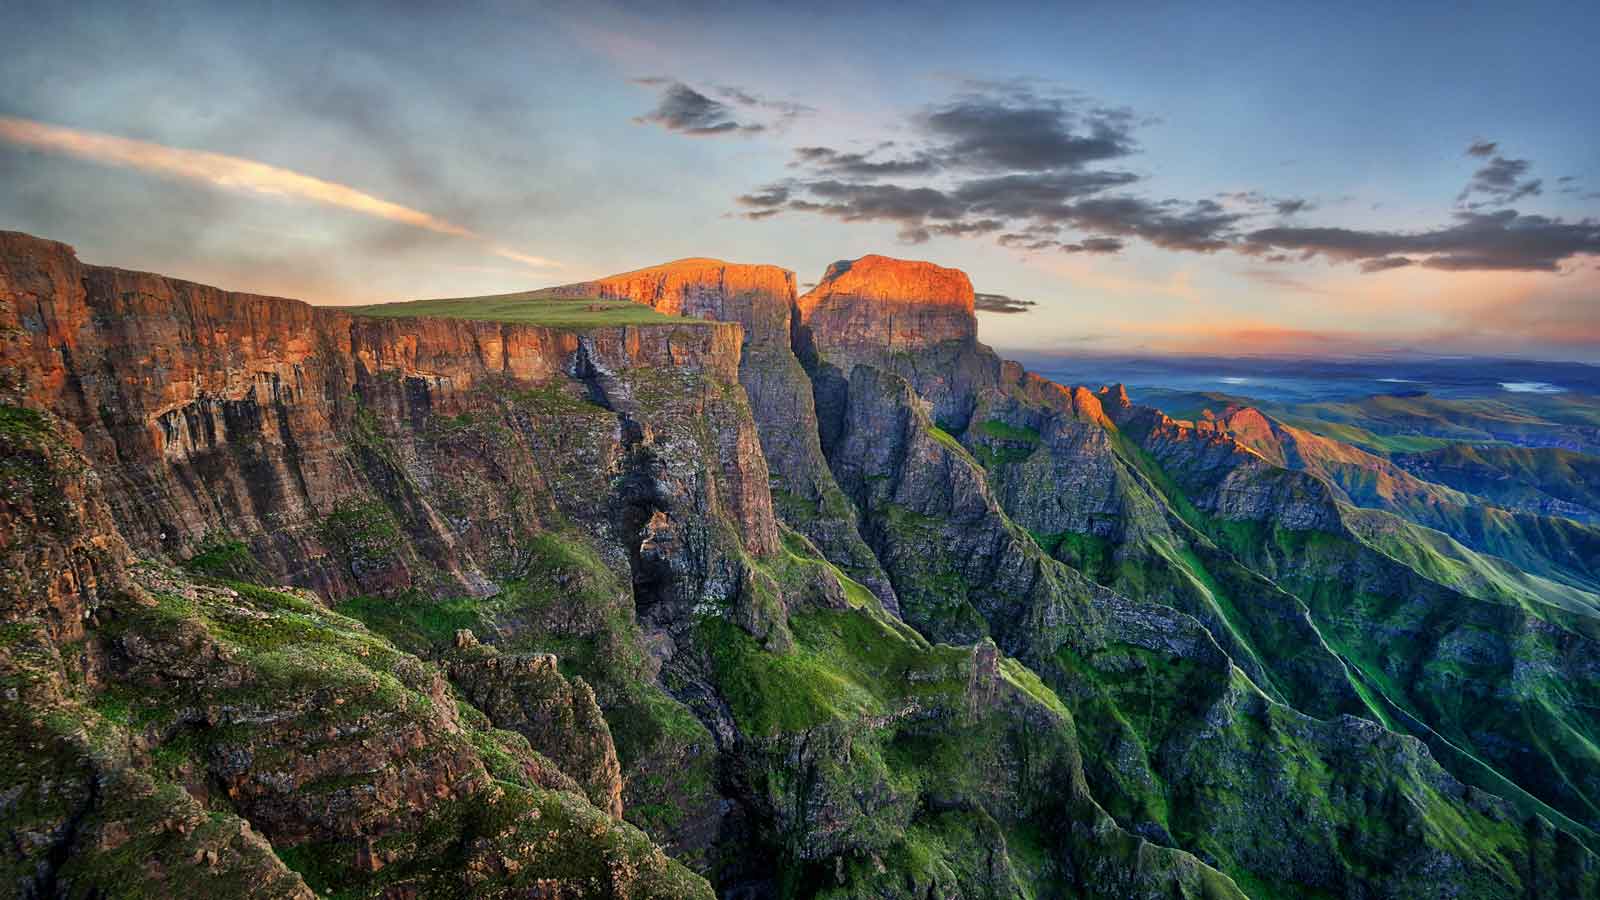 <p>This glorious Drakensberg region caters to those looking for a relaxing getaway, a cultural experience, or an adventure. This UNESCO World Heritage Site is a majestic mountain range home to a diverse ecosystem.</p><p>Climb mountains, cool off in natural rock pools, stay cozy in a “berg cottage” while the sun sets behind the mountains, or learn more about South Africa’s rich cultural heritage on your visit to the <a href="https://www.nature-reserve.co.za/south-africa-info-drakensberg.html" rel="nofollow noopener">Drakensberg</a>.</p>